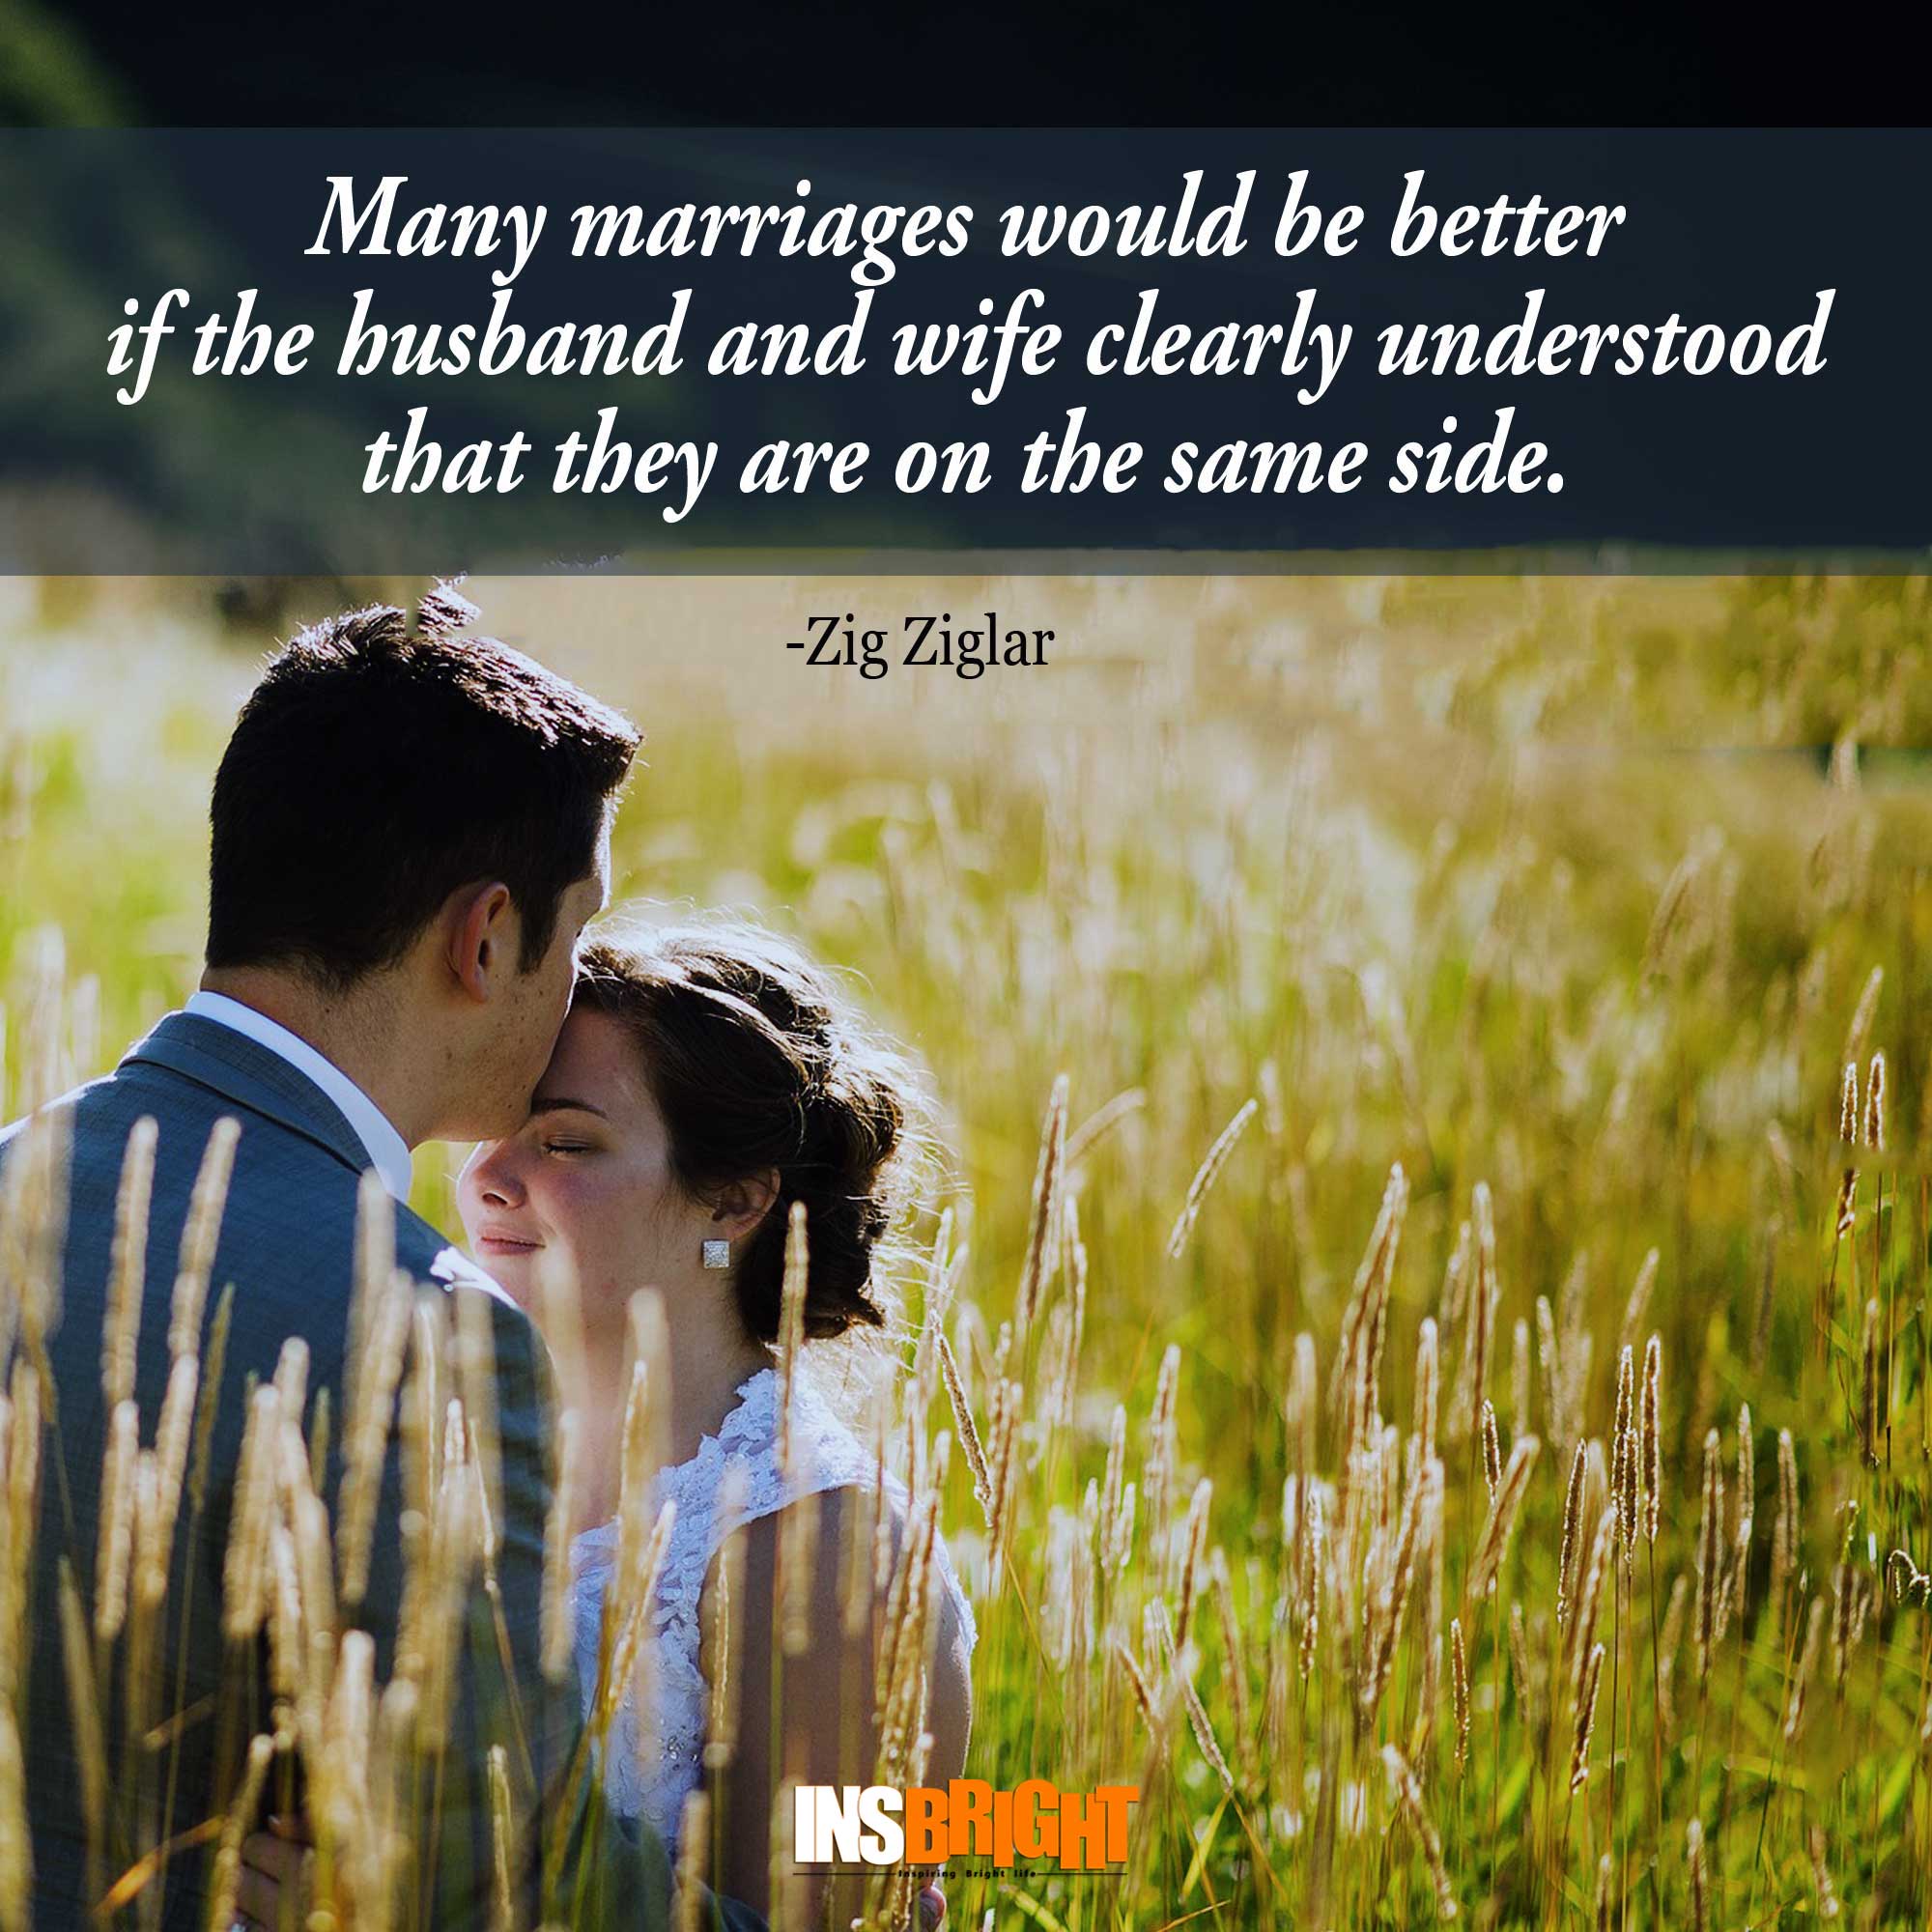 Inspirational Marriage Quotes By Famous People With Images | Insbright